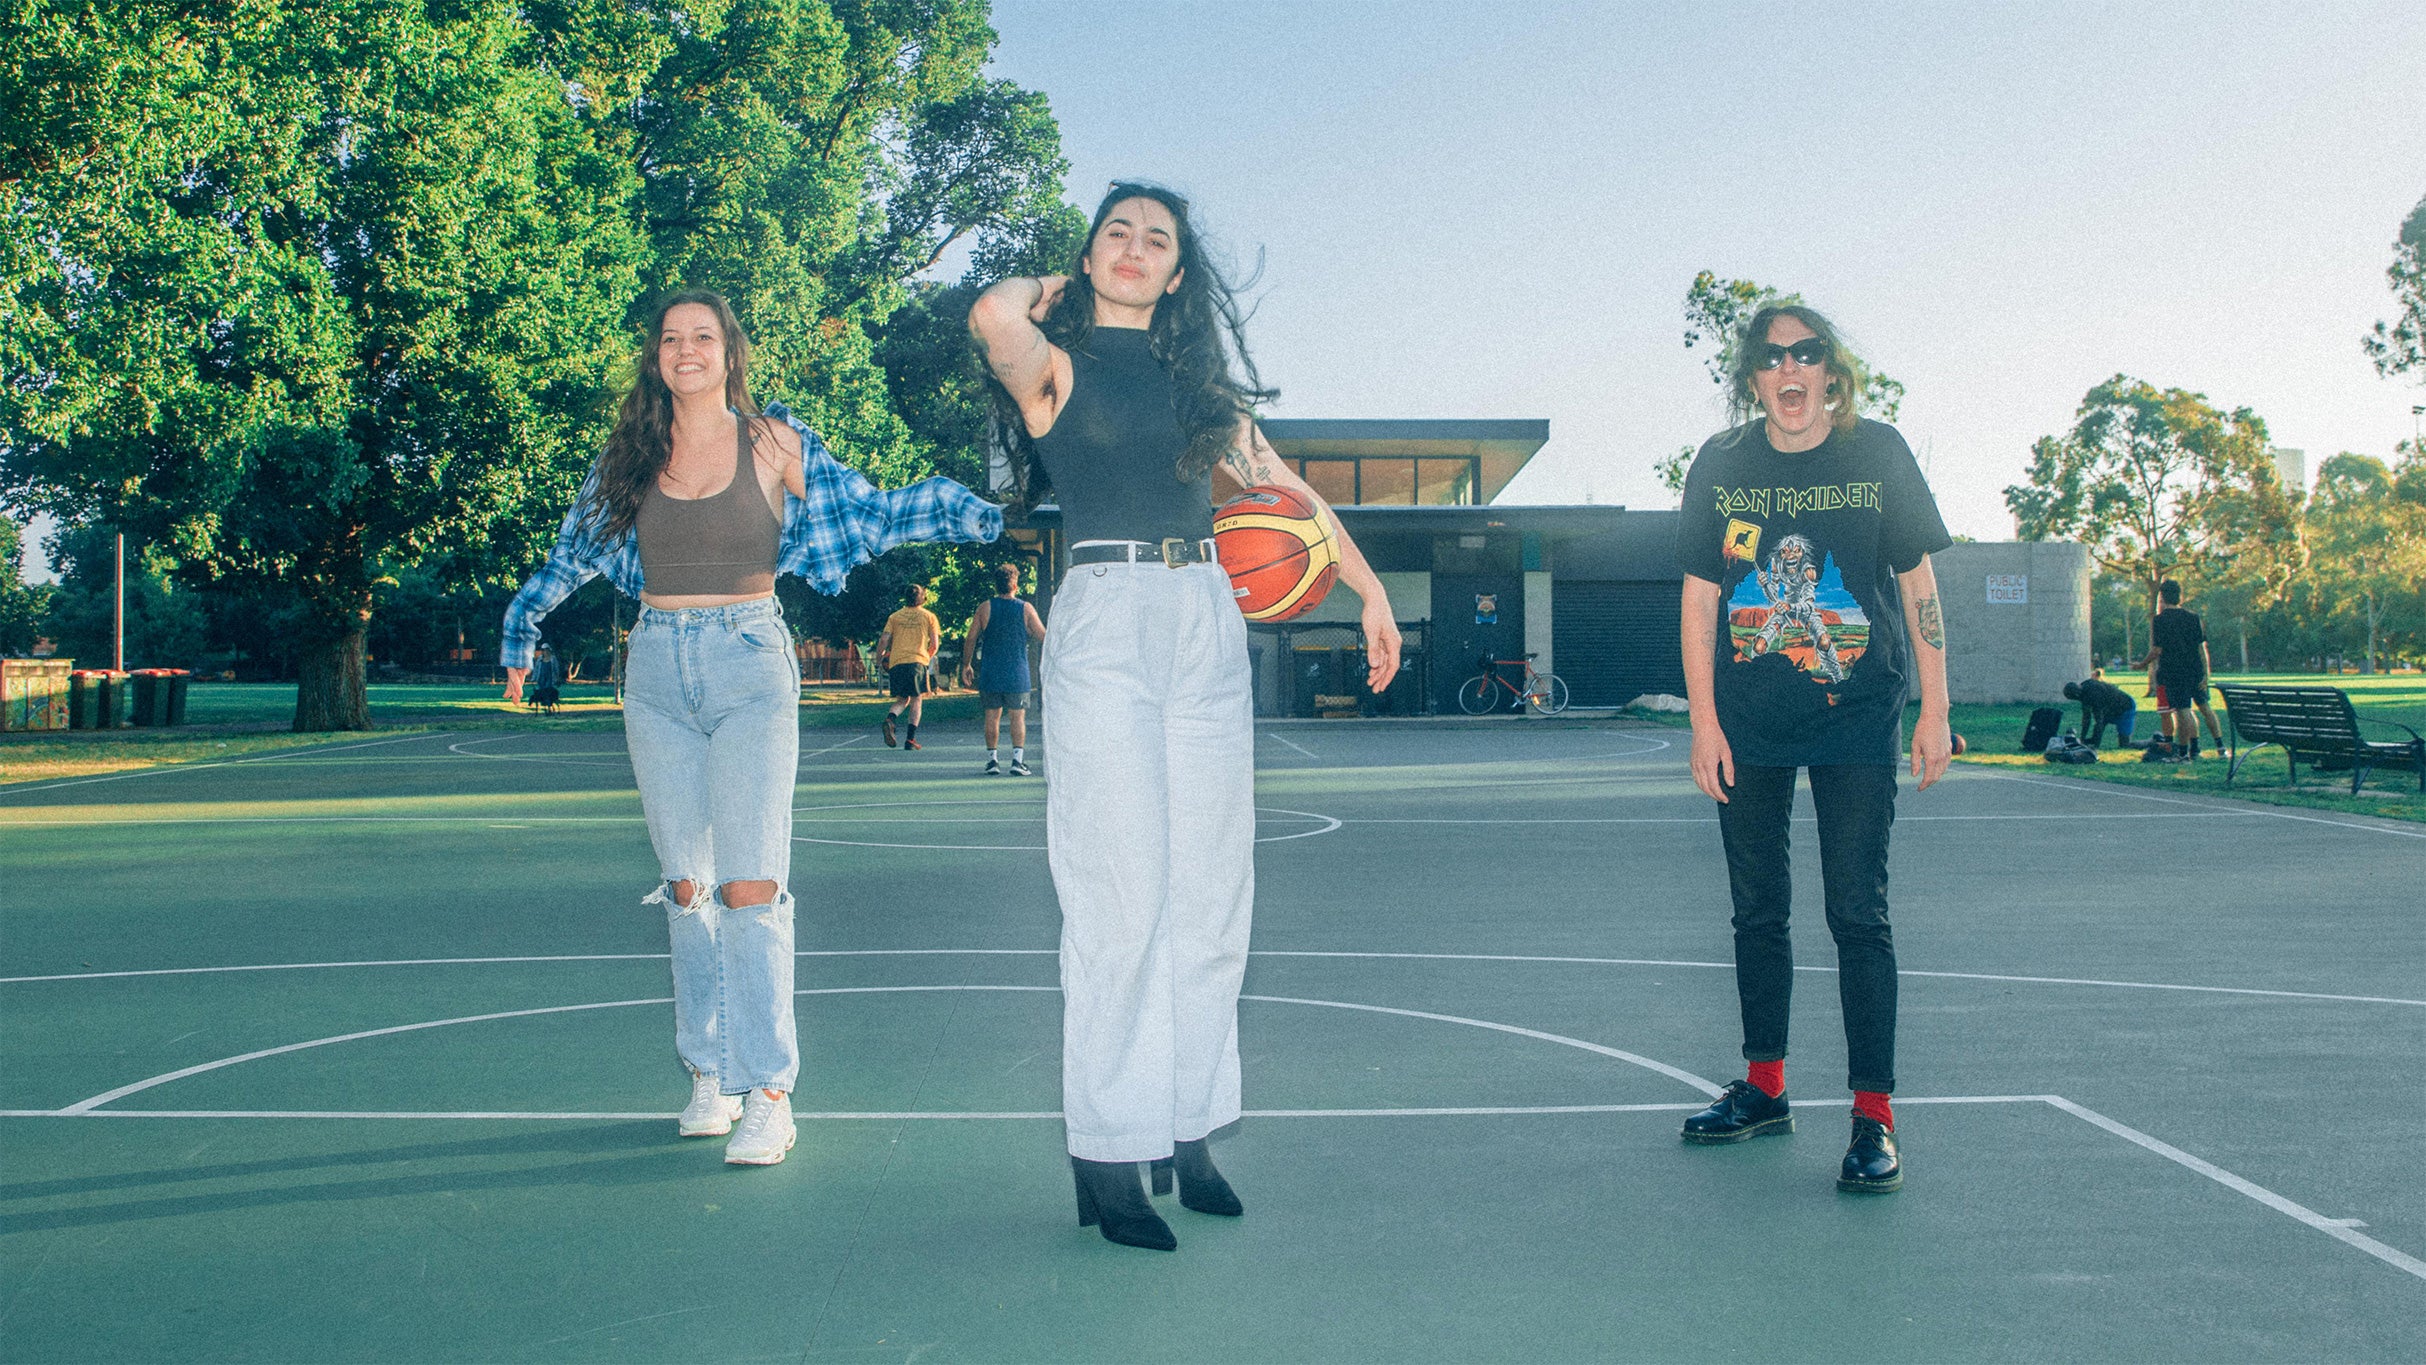 Camp Cope in Minneapolis promo photo for Exclusive presale offer code